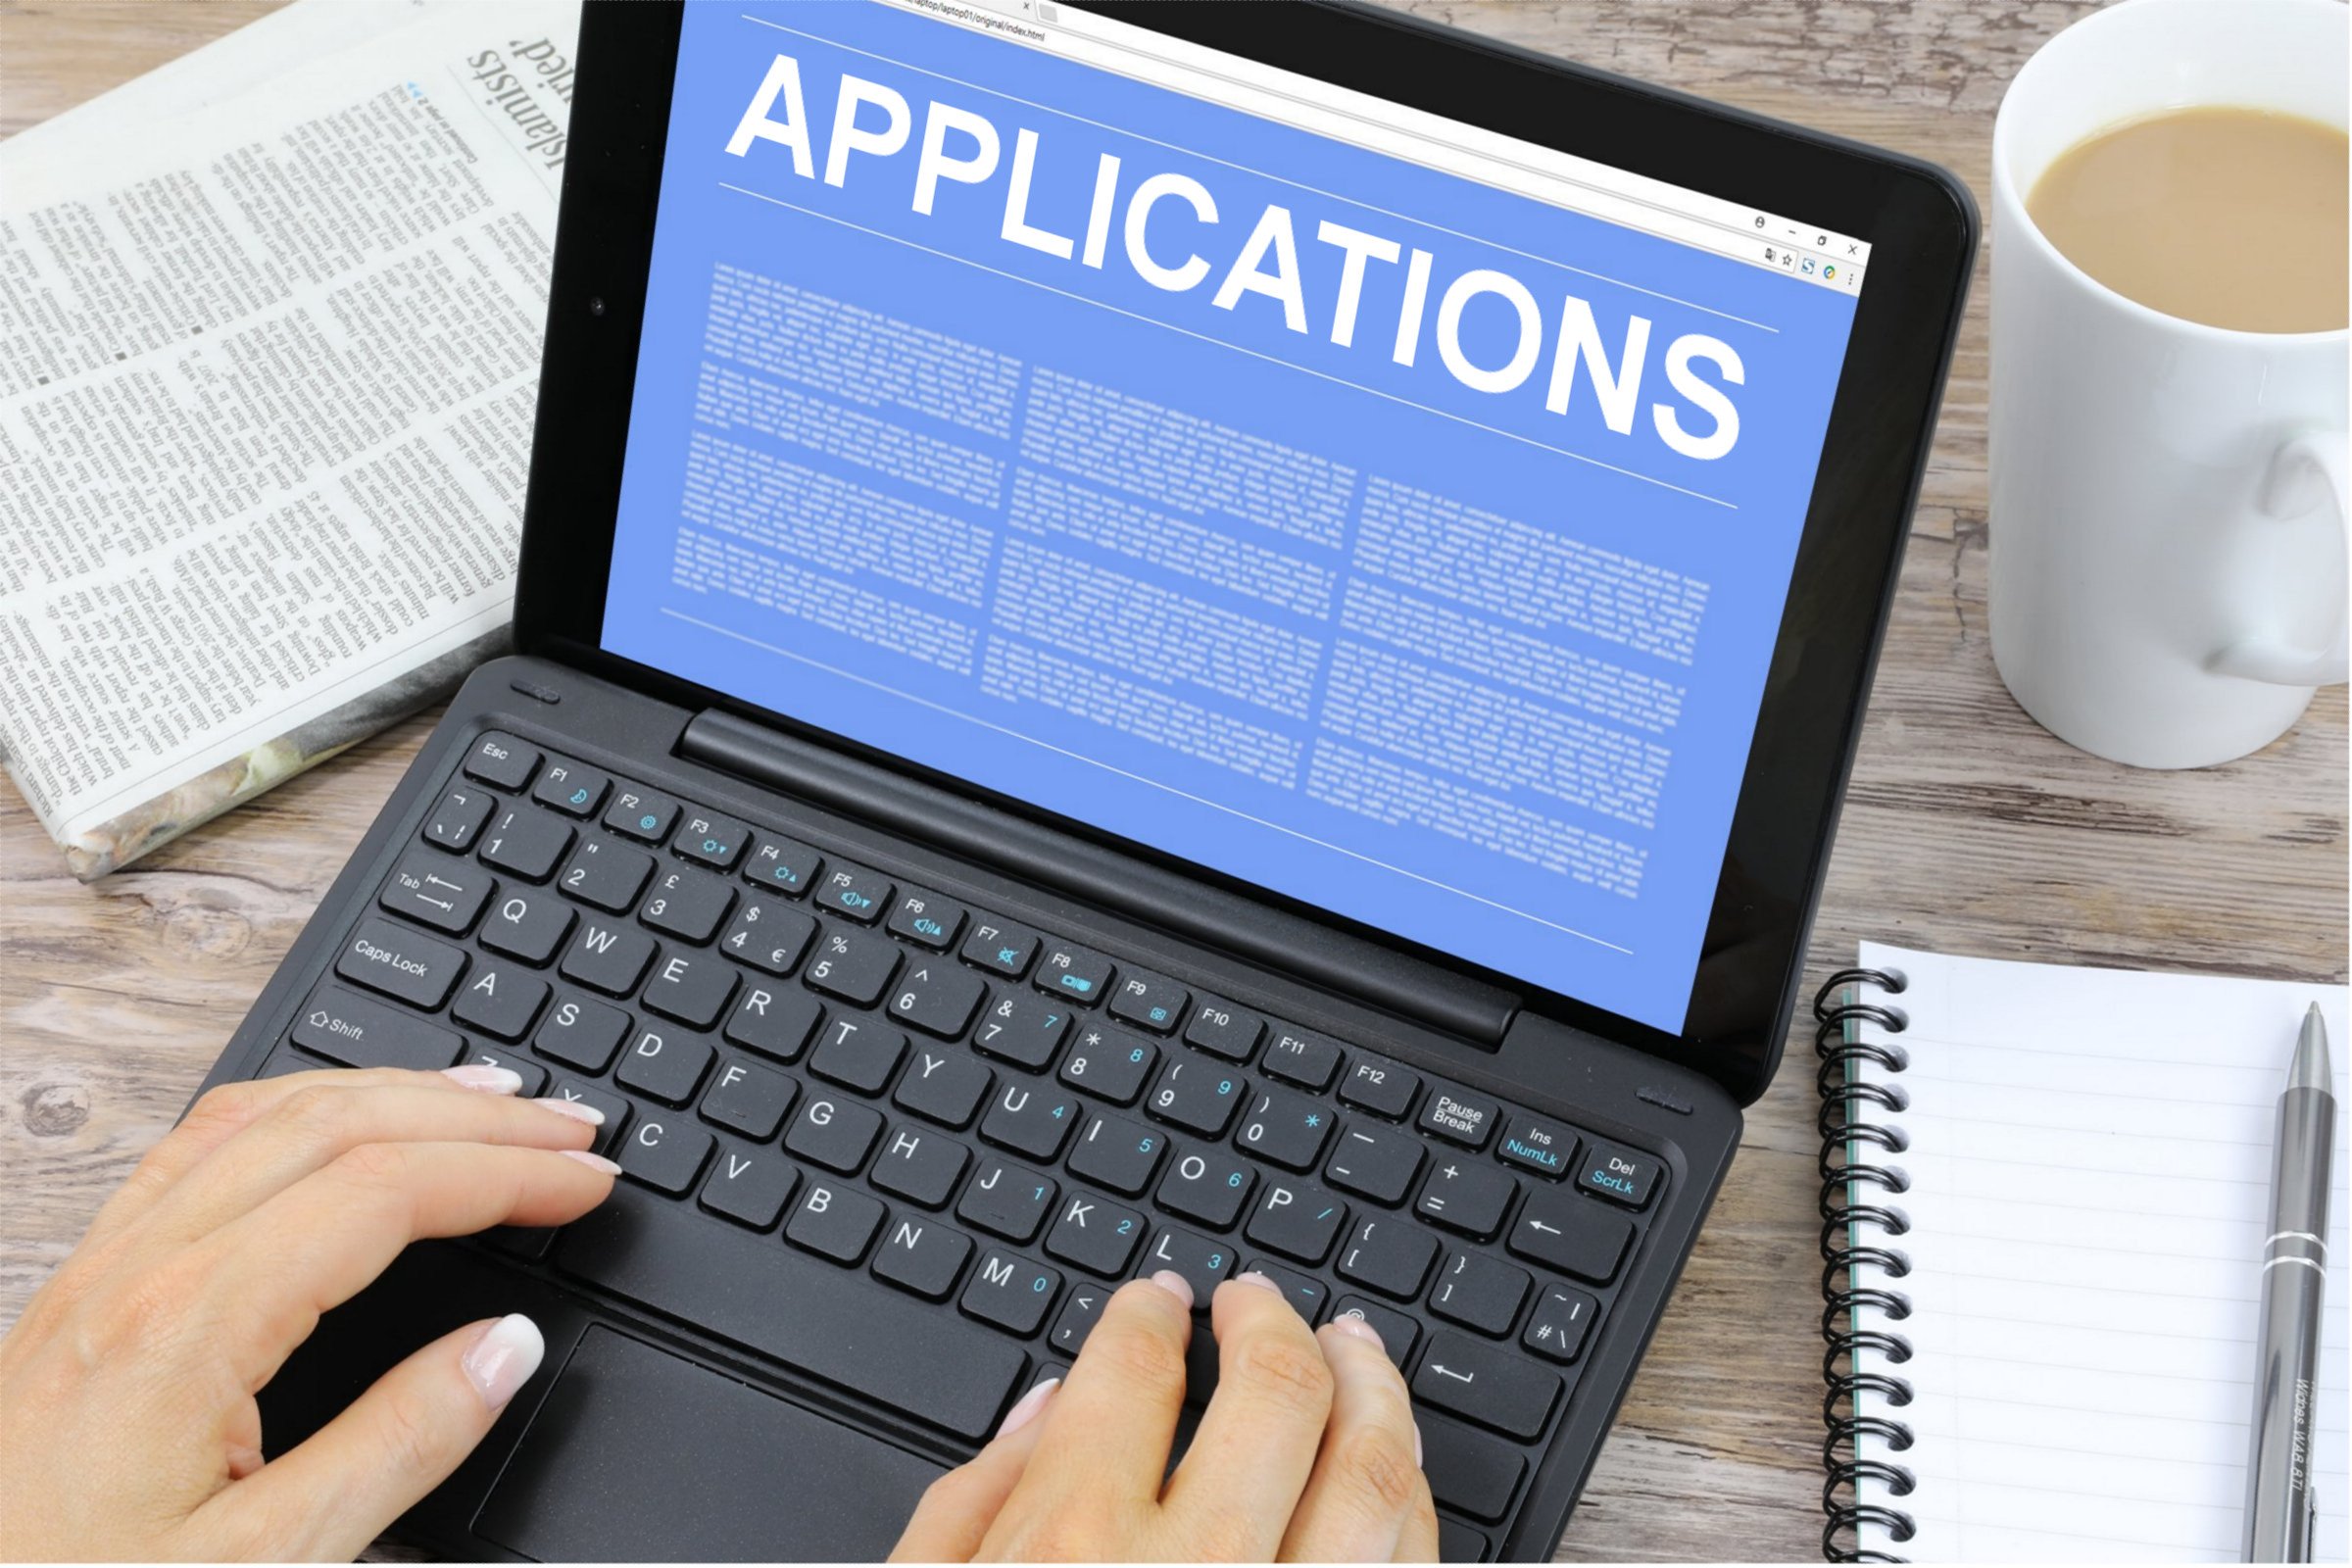 Image of a person on a laptop looking at an application